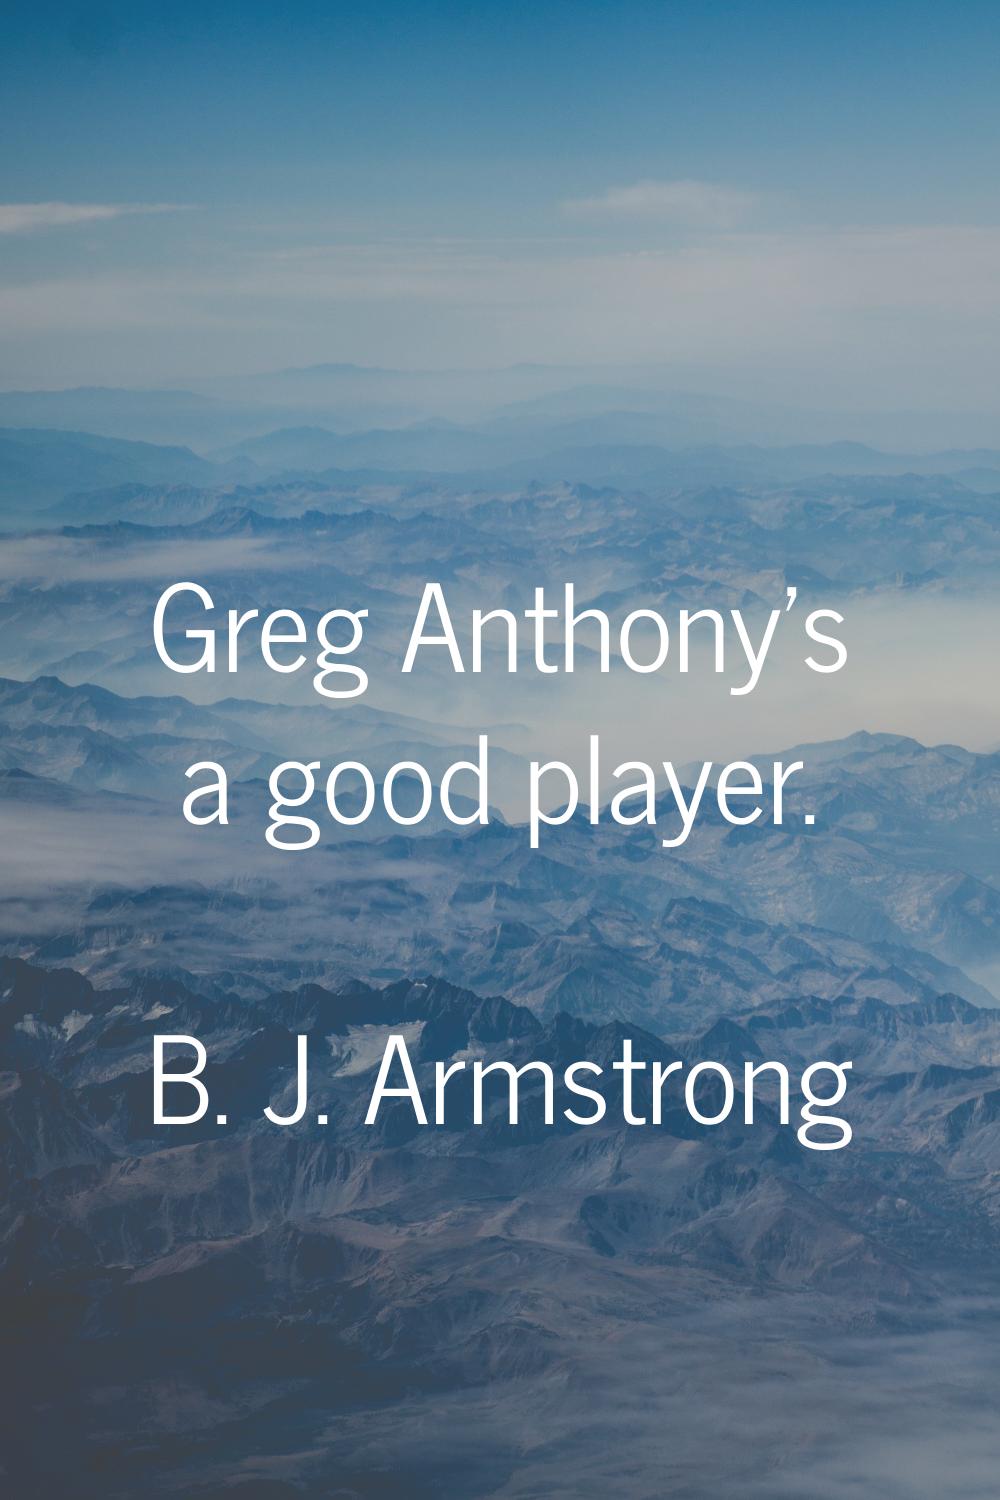 Greg Anthony's a good player.